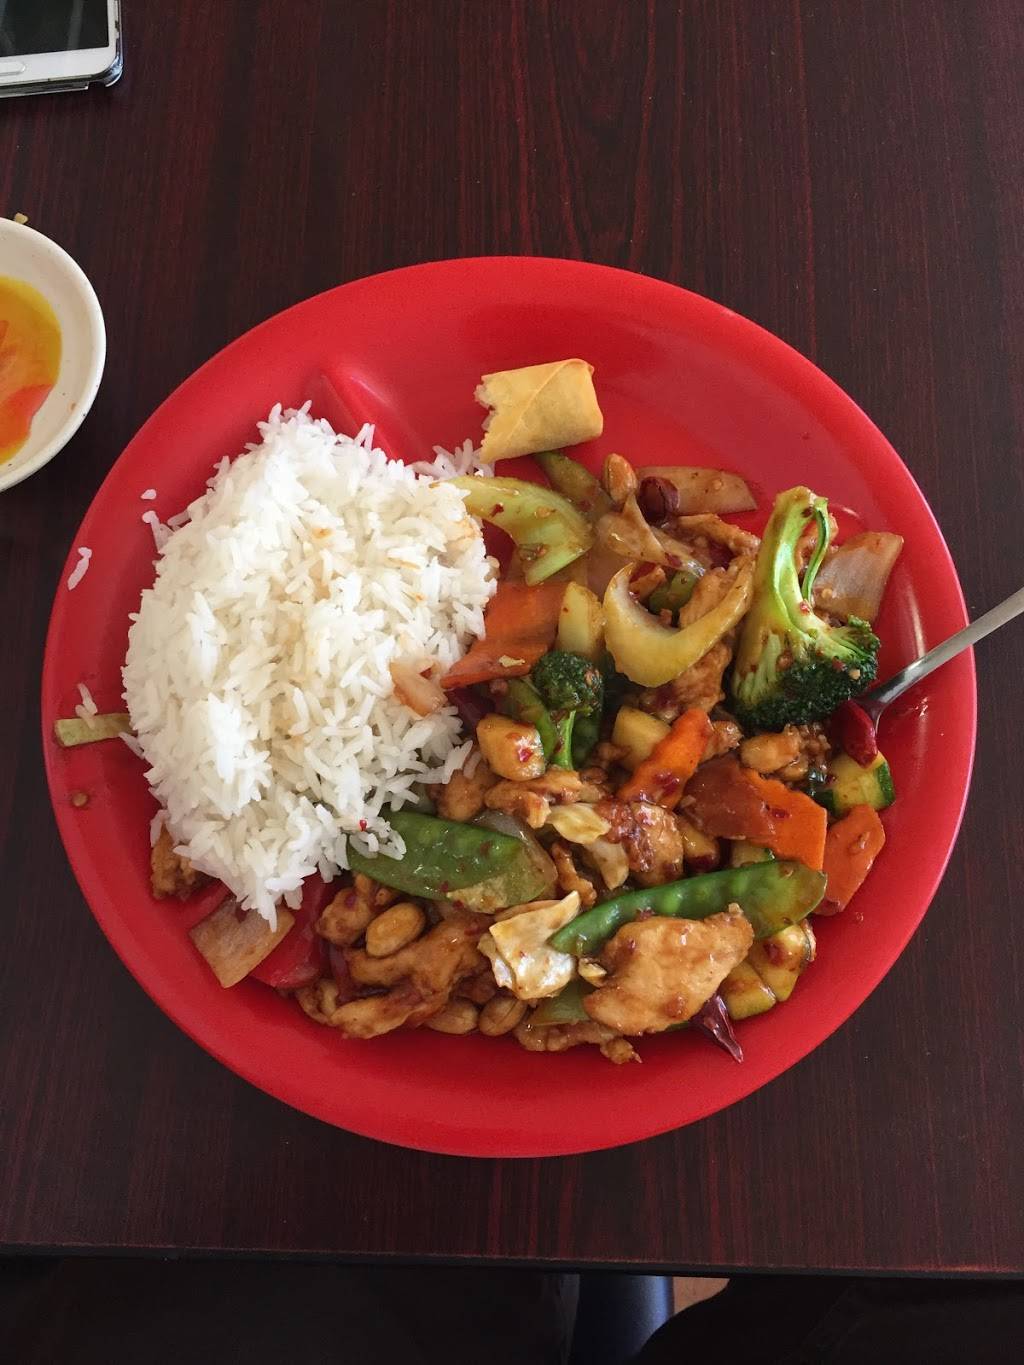 H&G Asian Cafe | meal delivery | 7939 E Arapahoe Rd #170, Greenwood Village, CO 80112, USA | 3032208898 OR +1 303-220-8898